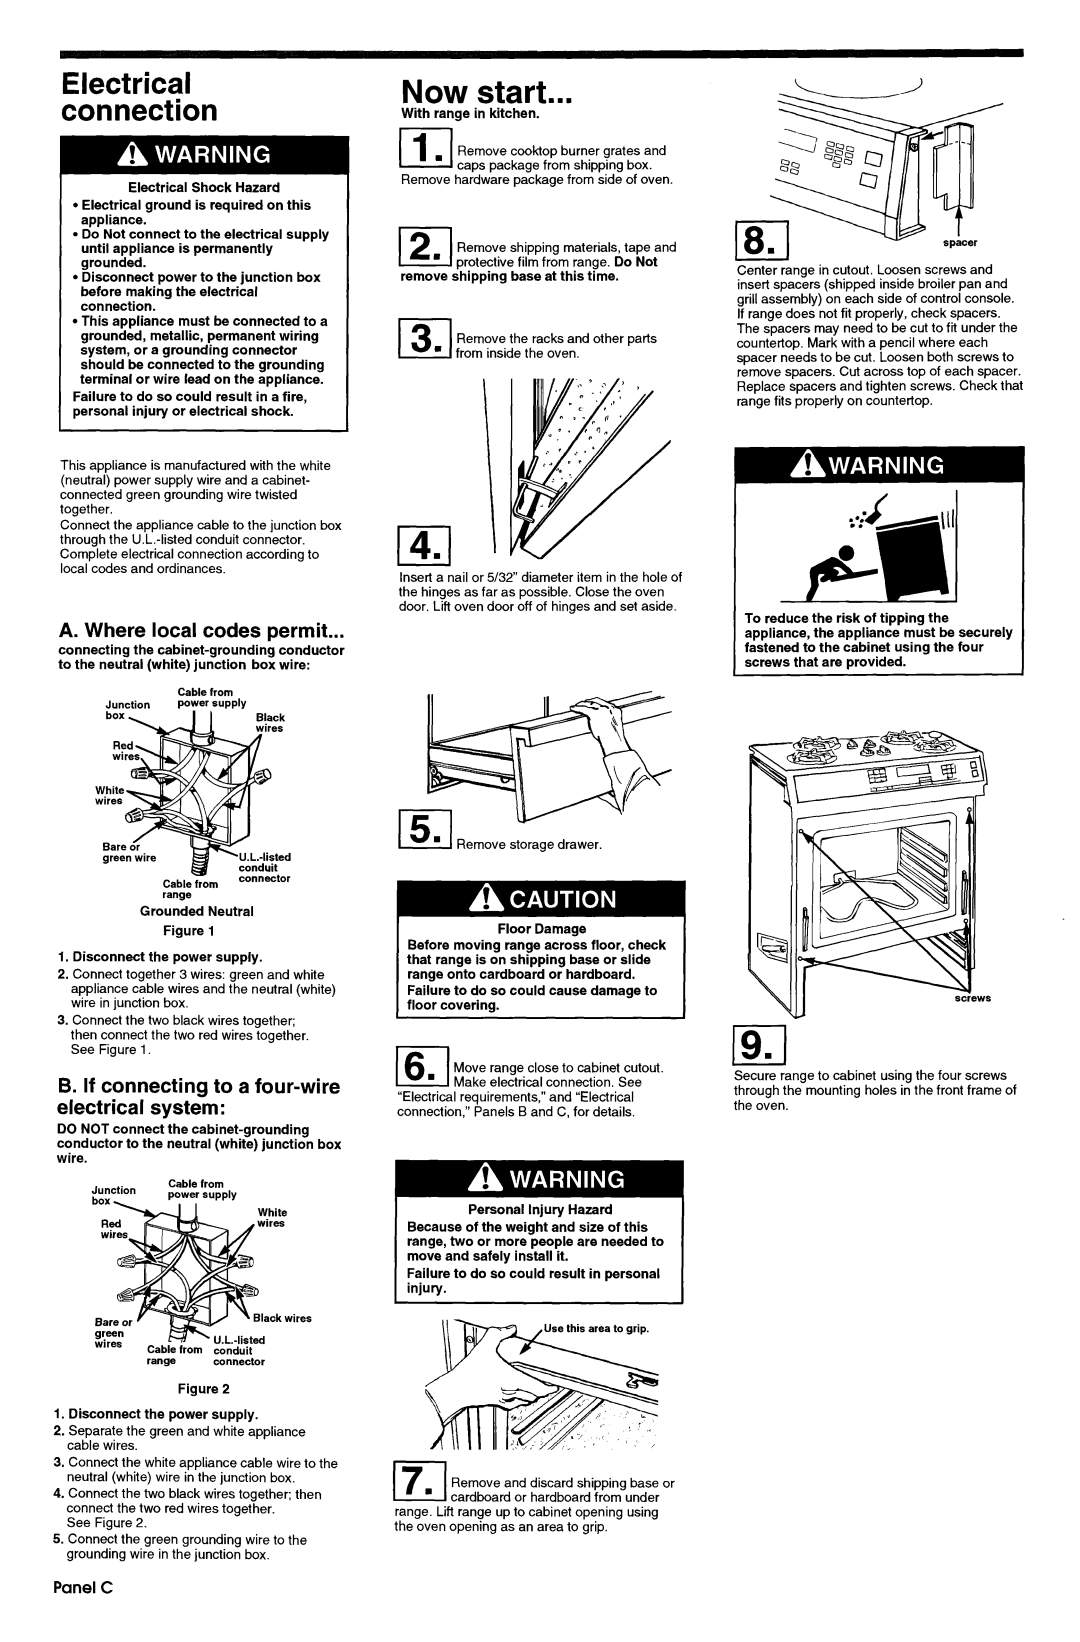 KitchenAid 3186508 Electrical connection, A. Where local codes permit, B. If connecting to a four-wire electrical system 